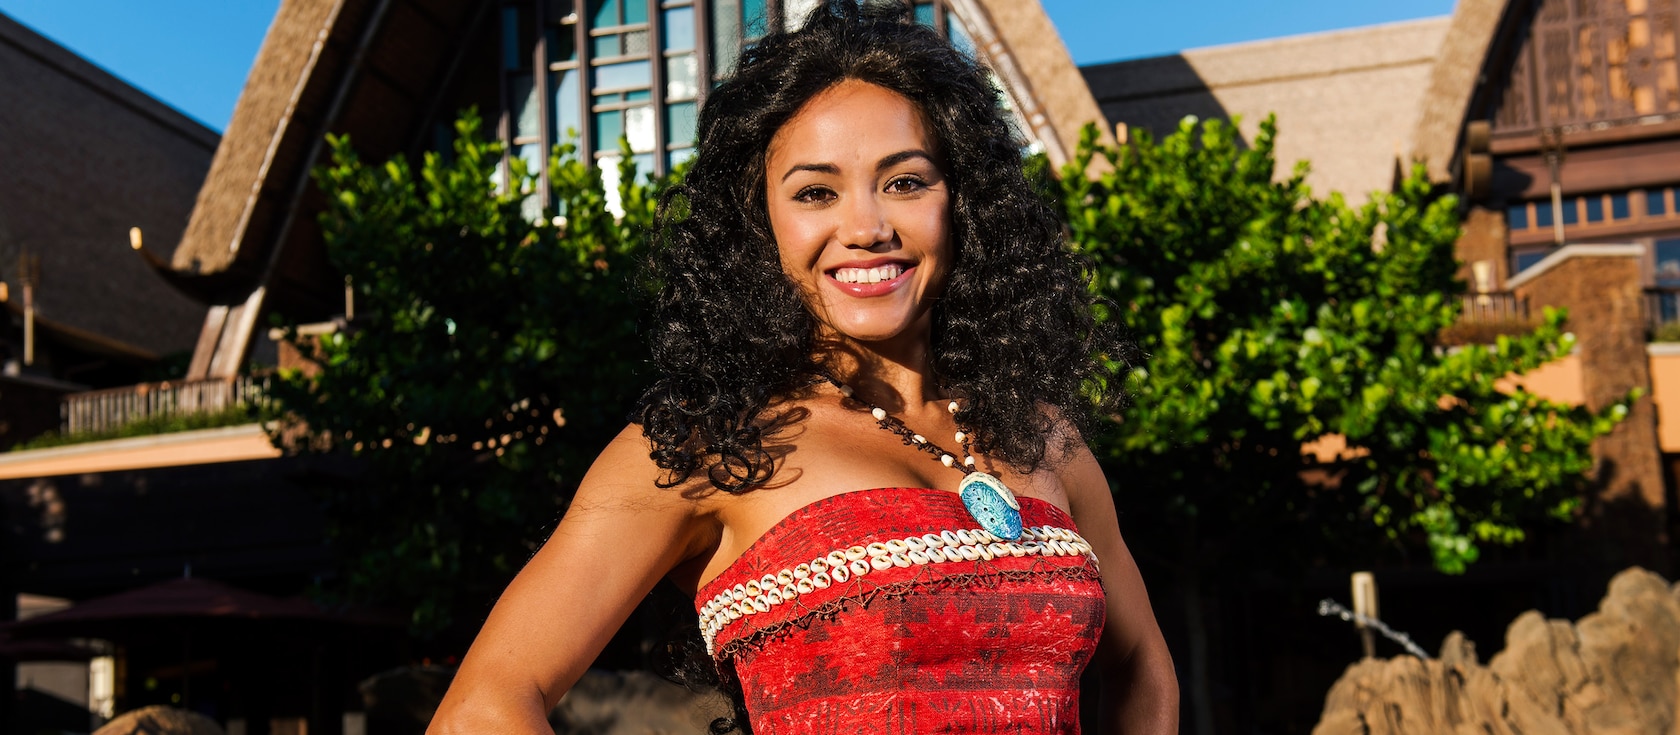 The Moana Character stands smiling in front of Aulani, wearing a top emblazoned with traditional island patterns and small seashells. Her signature necklace, with seashell charm, hangs around her neck.